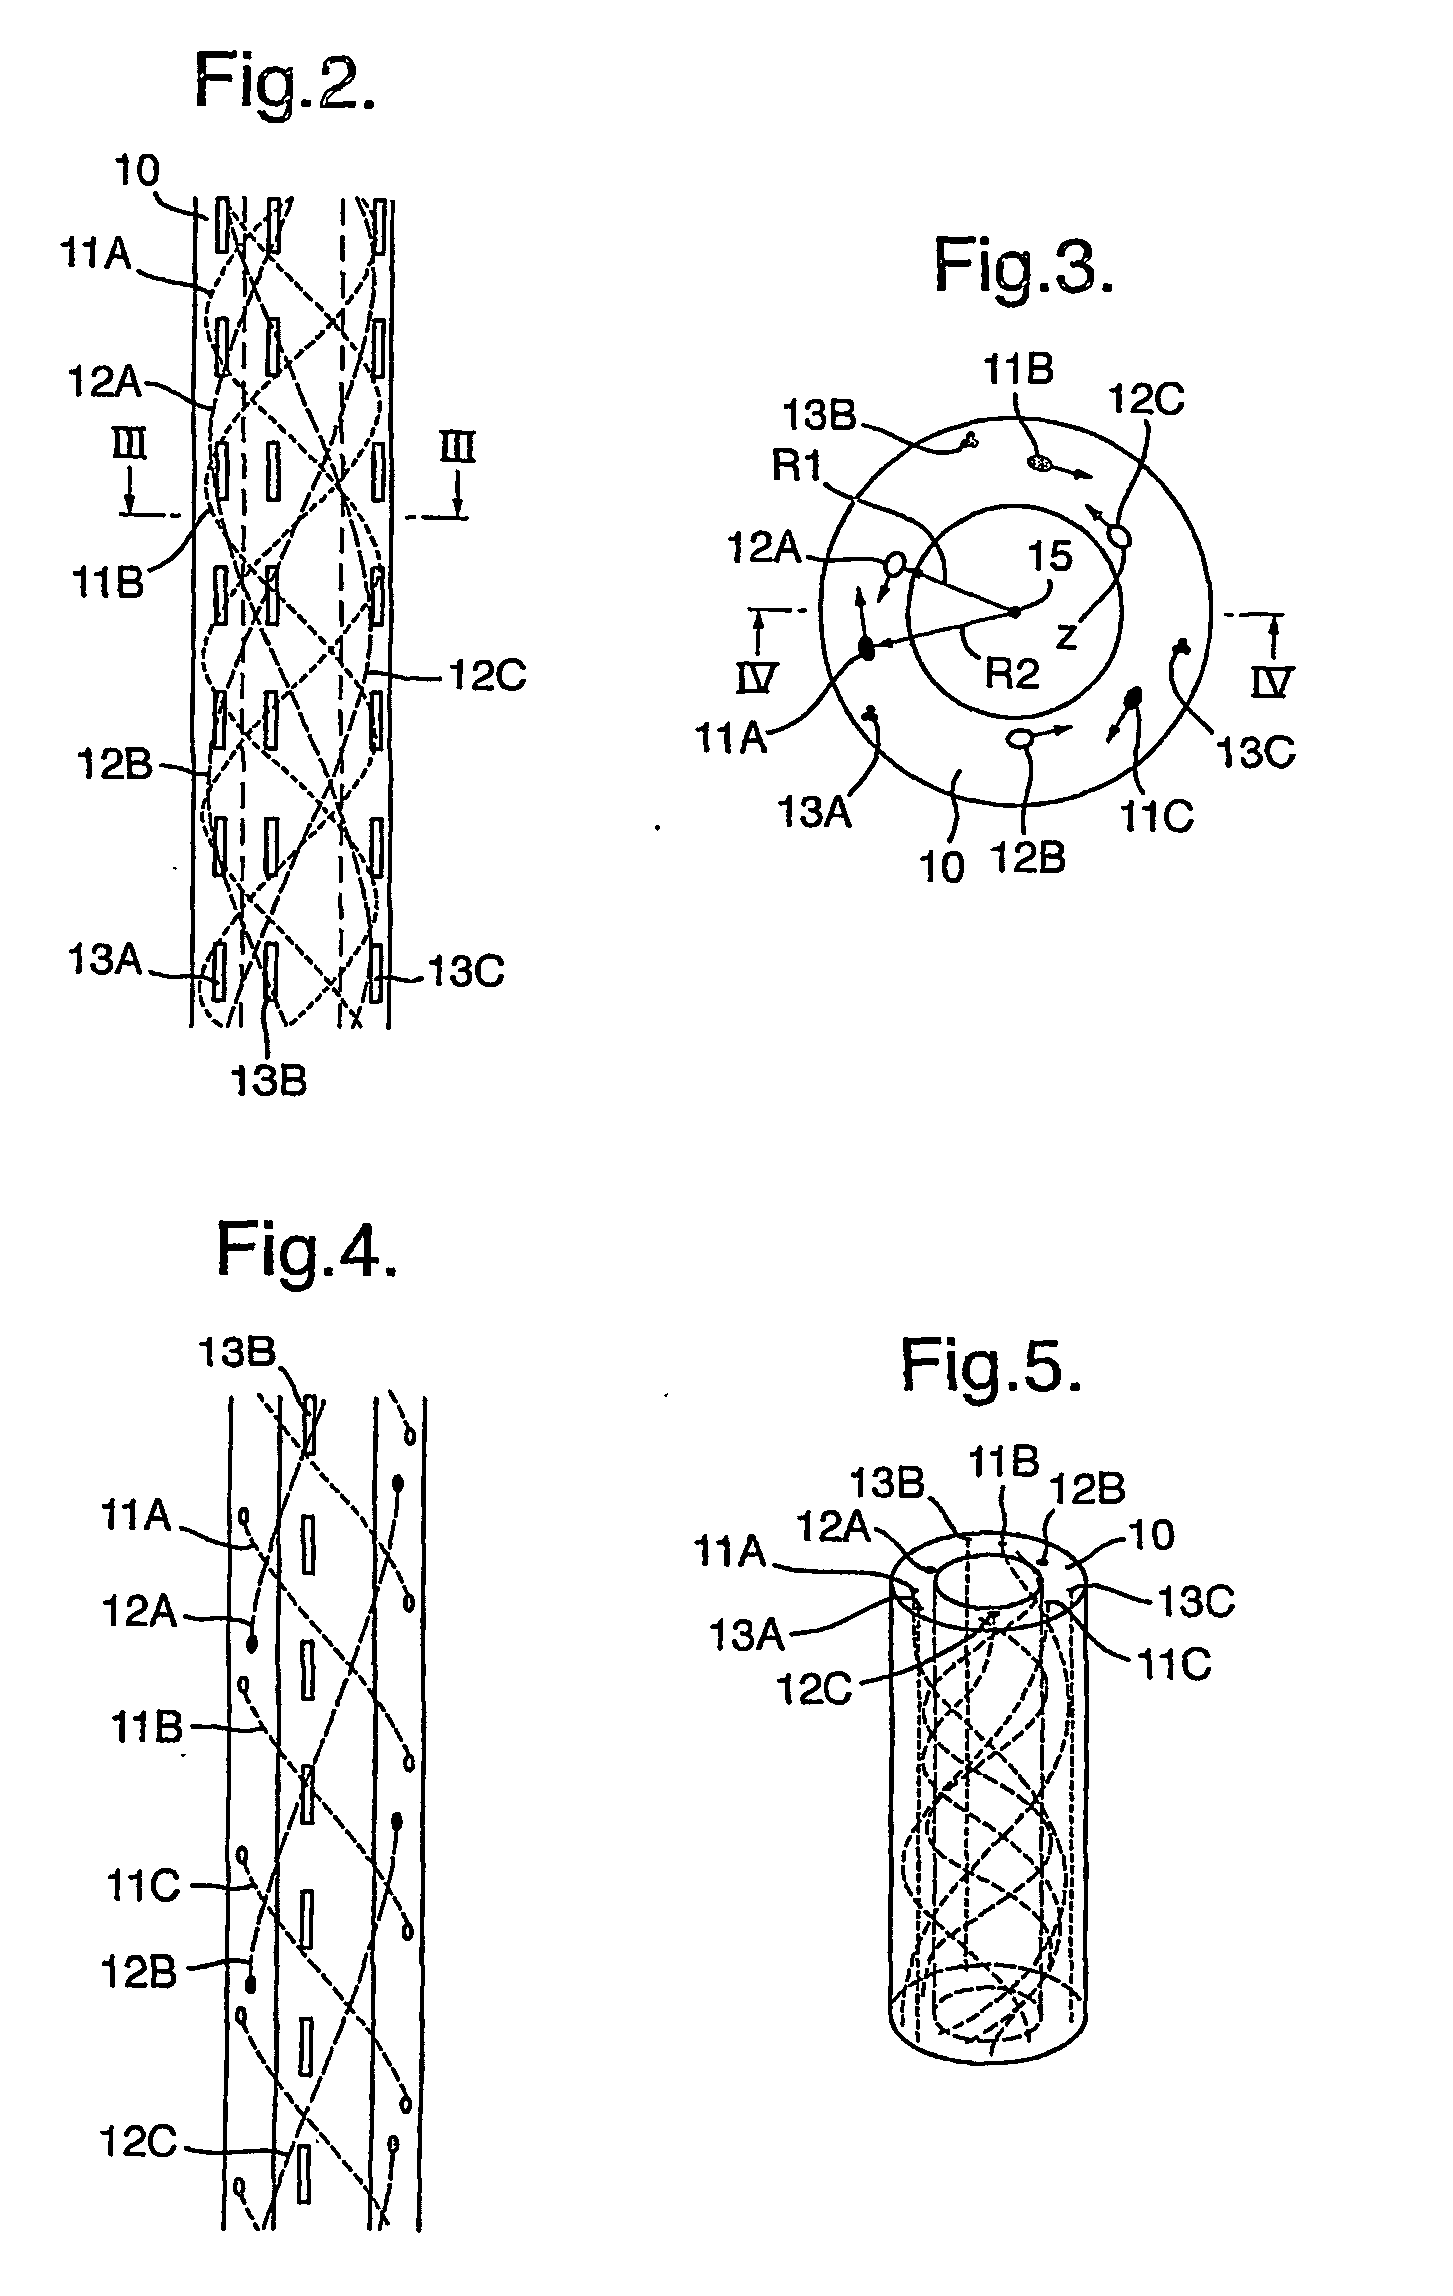 Coiled optical fiber assembly for measuring pressure and/or other physical data